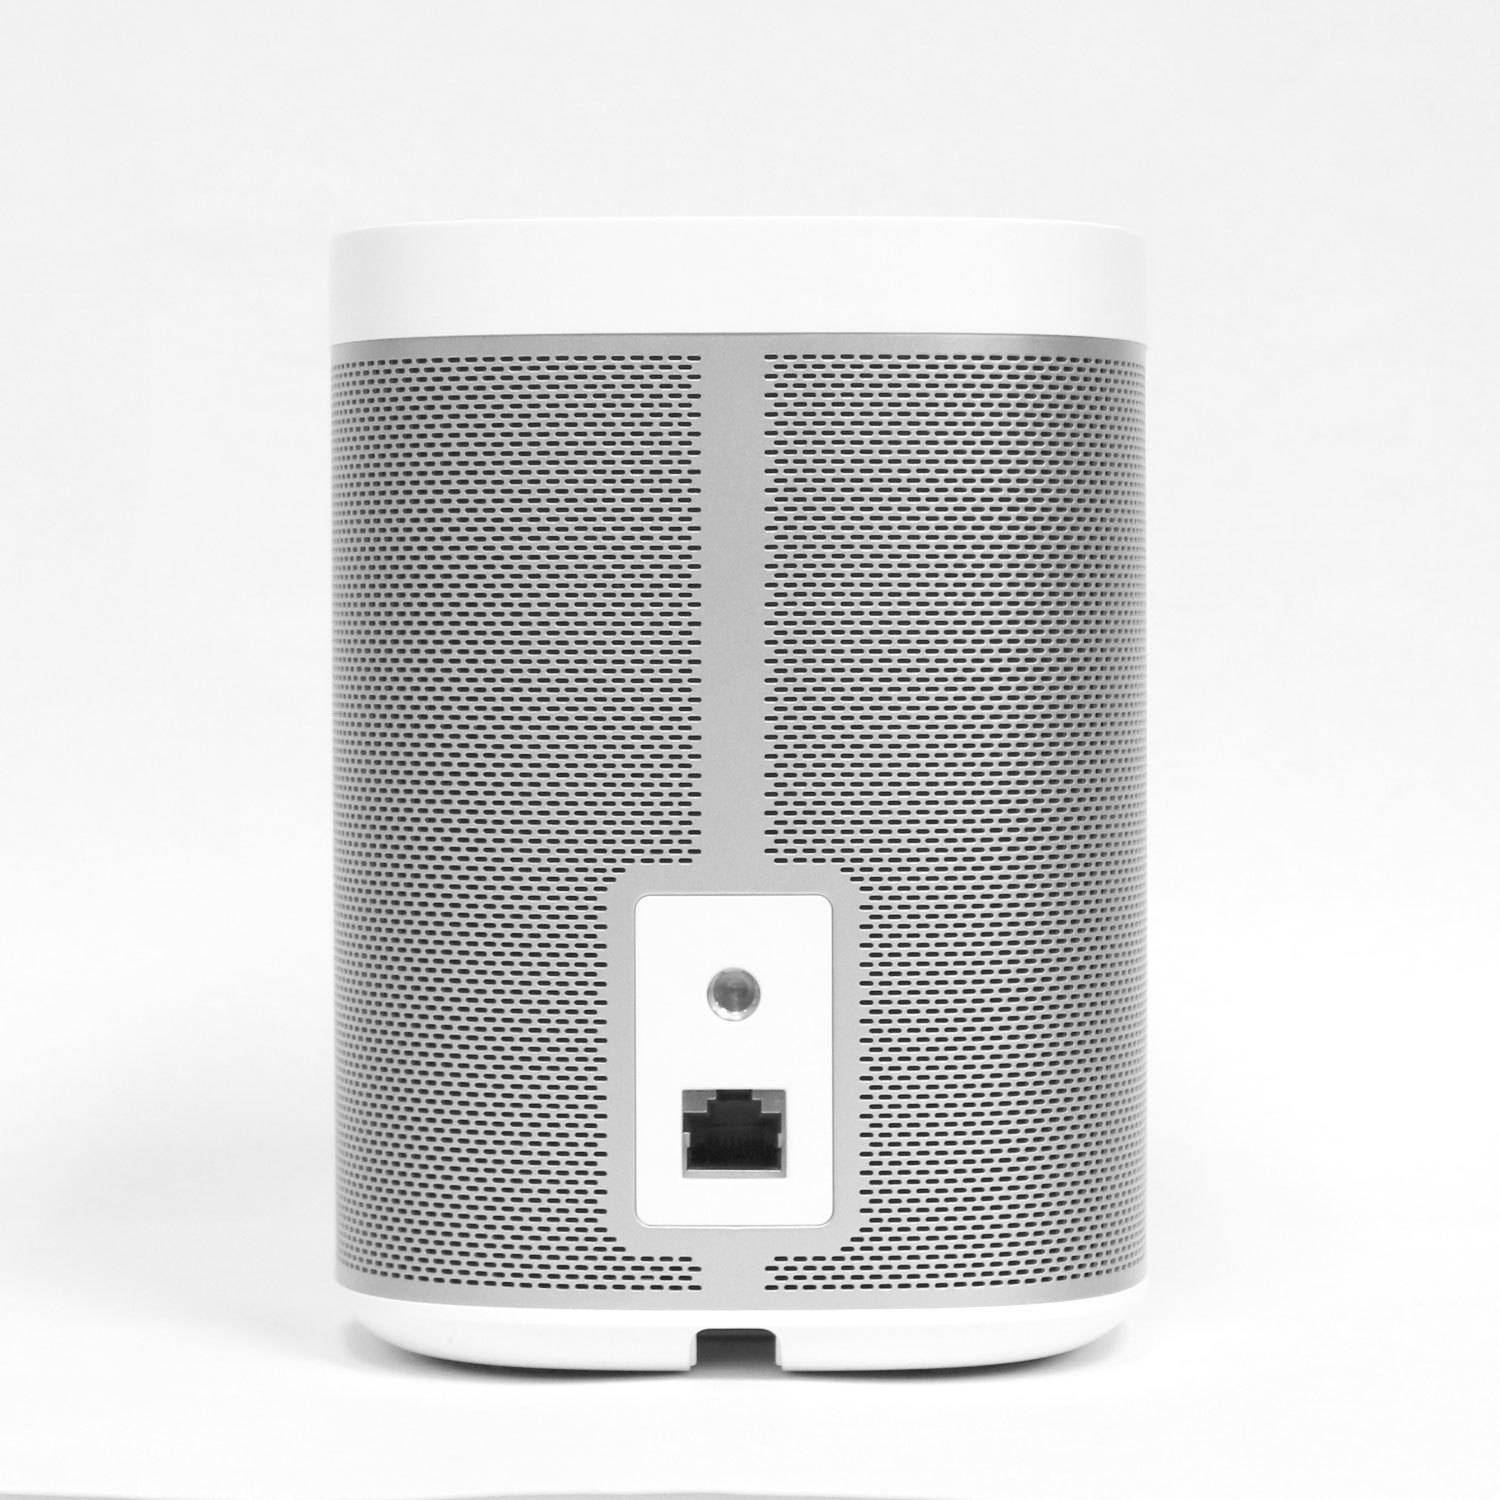 Sonos PLAY:1 Compact Smart Speaker for Streaming Music, White - image 5 of 5